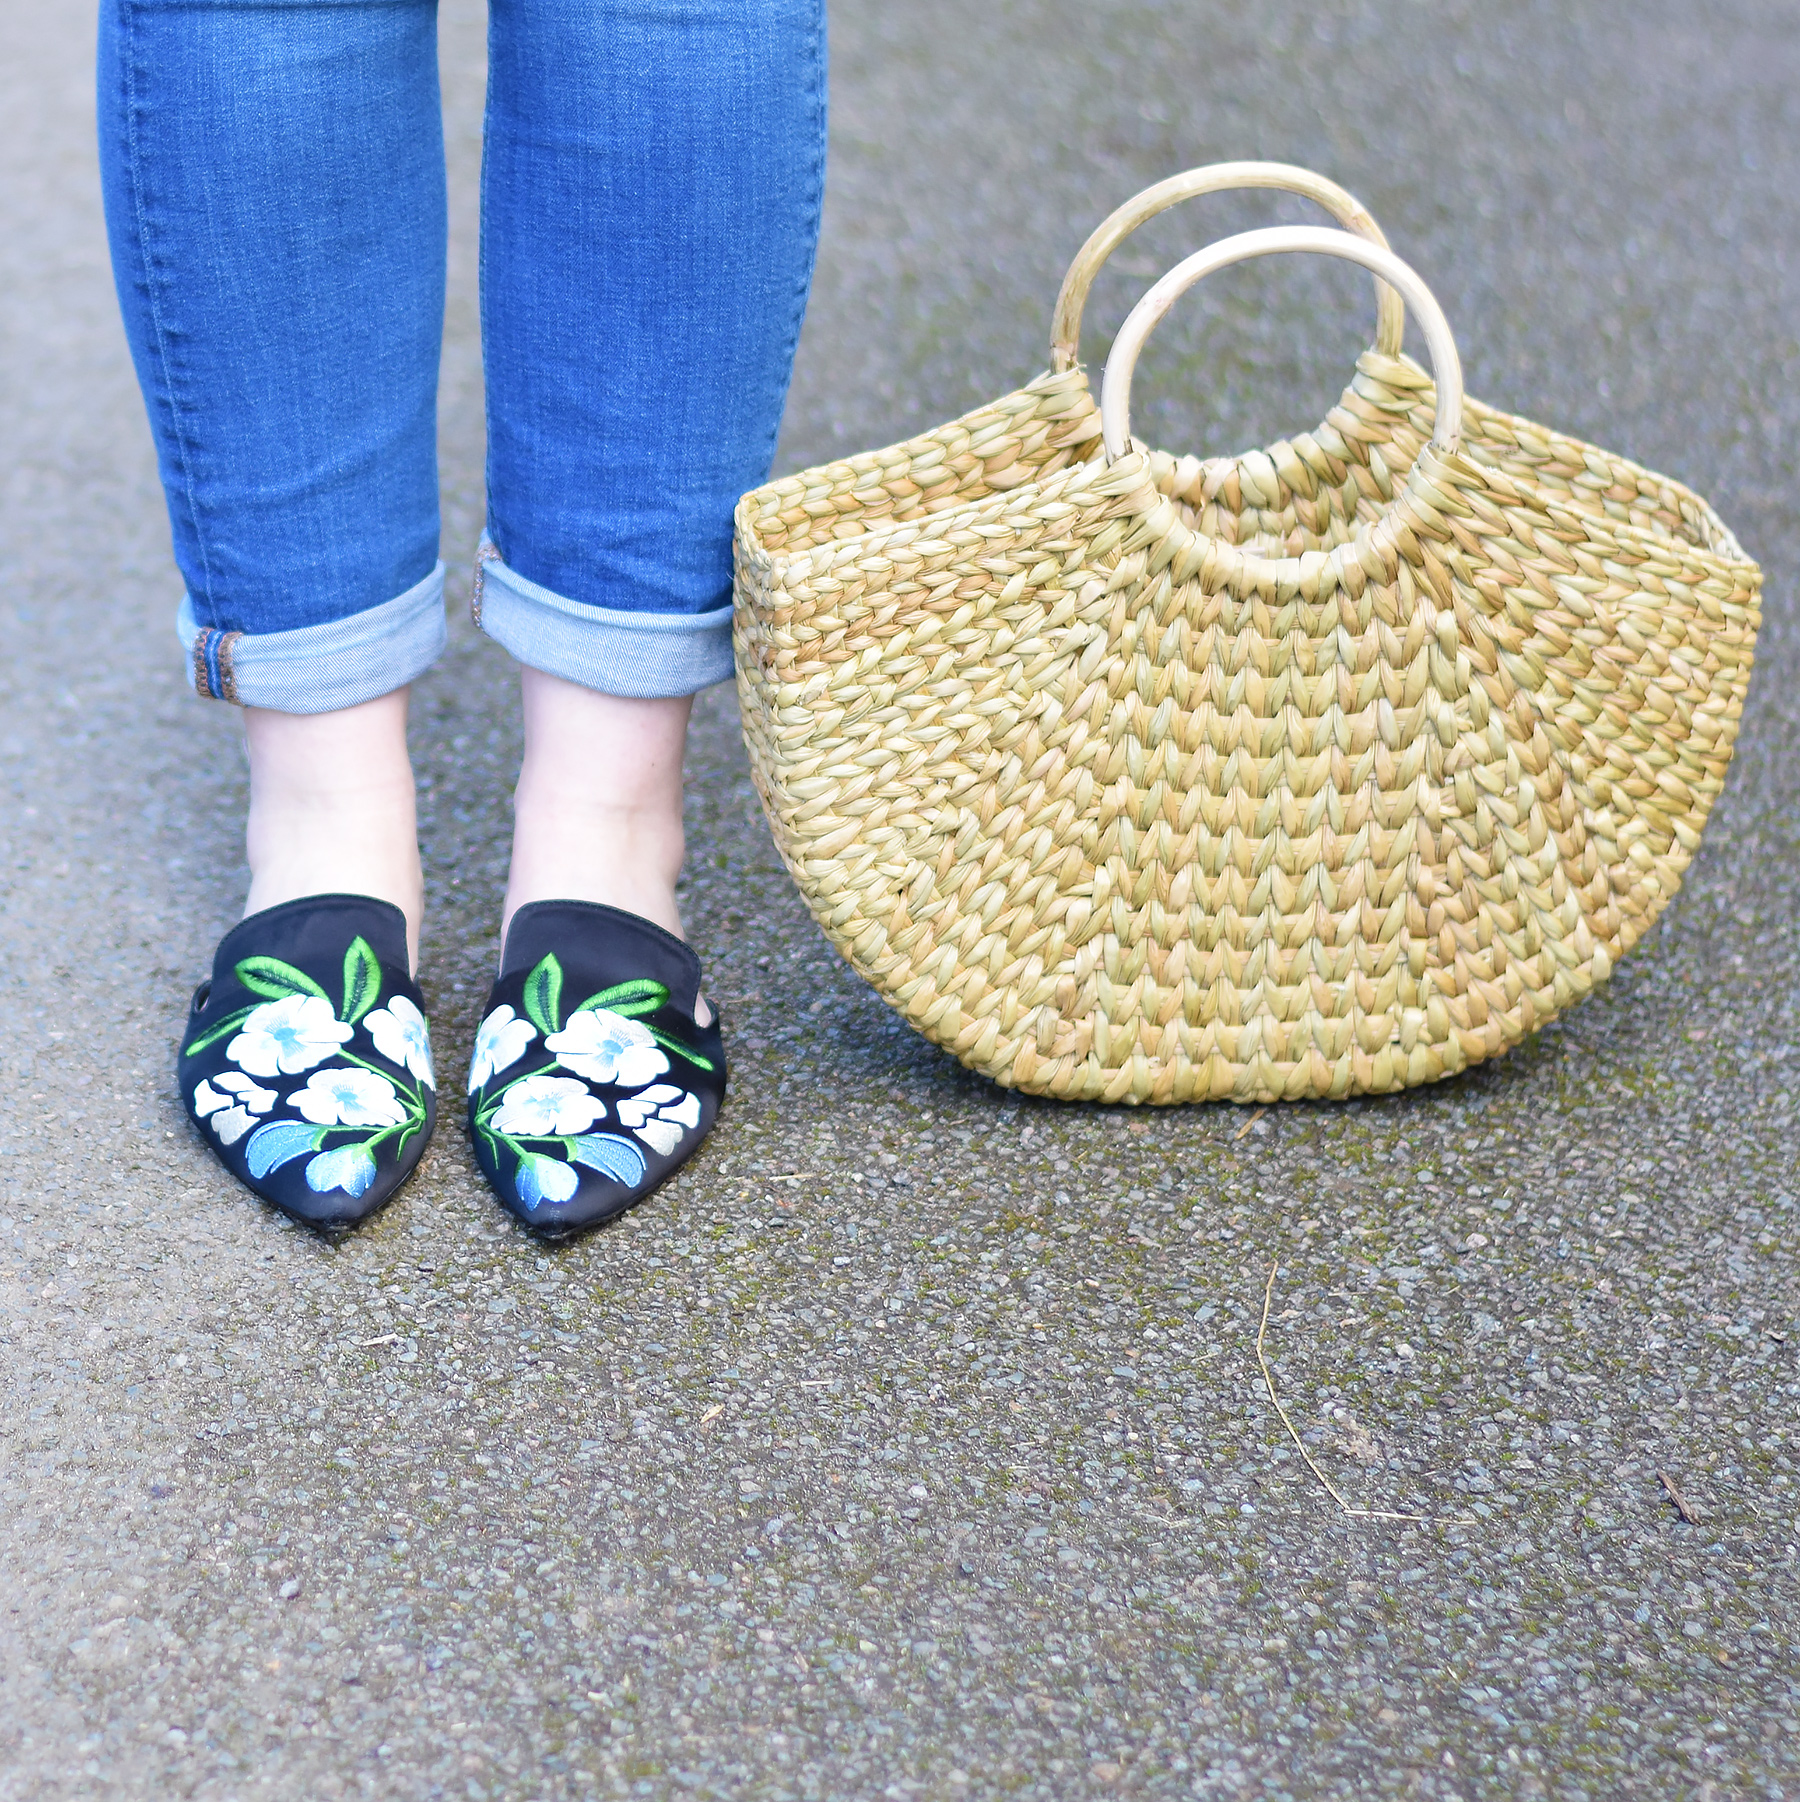 Zara pointed mules and straw bag with rounded handles